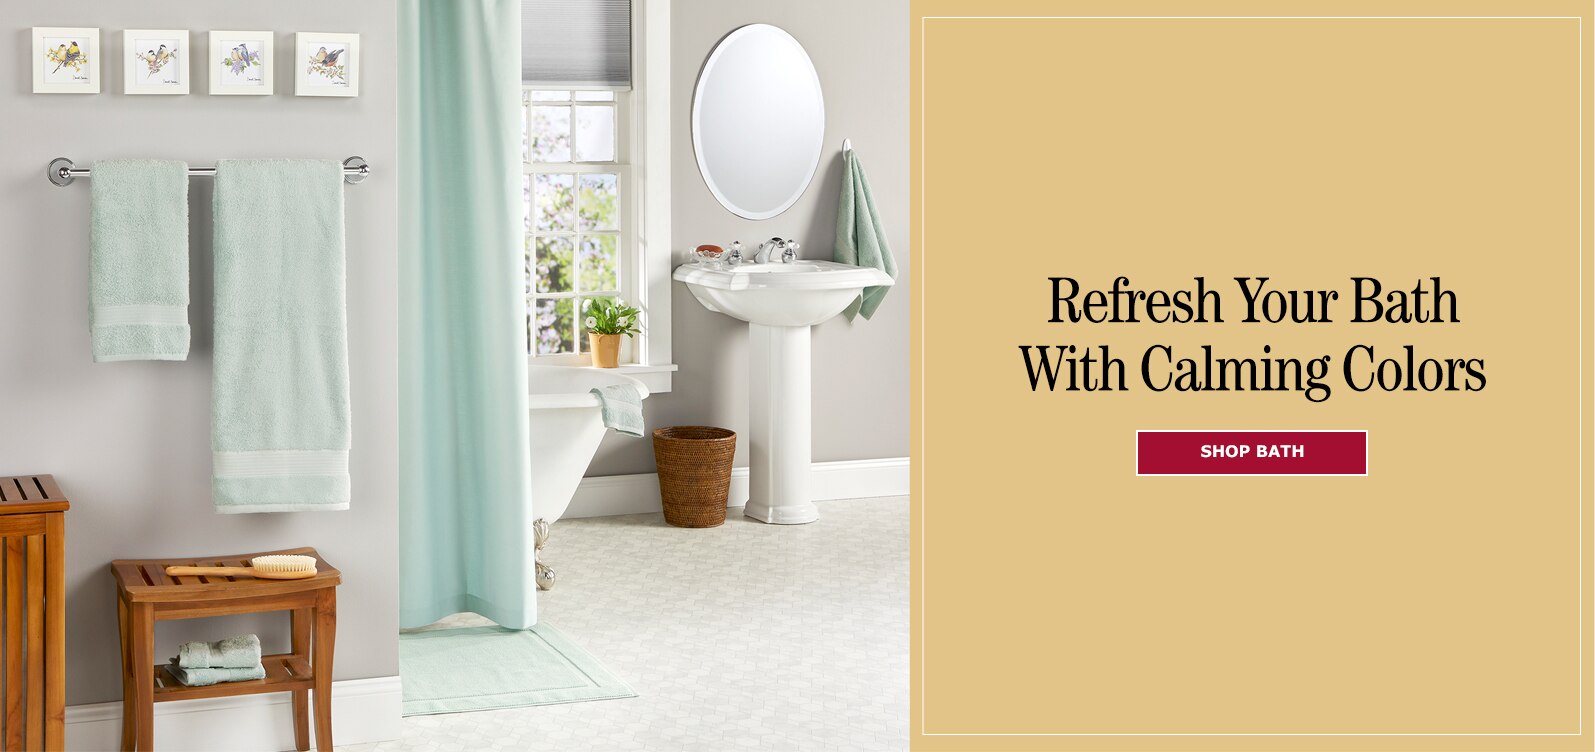 Refresh Your Bath with Calming Colors, Shop Bath